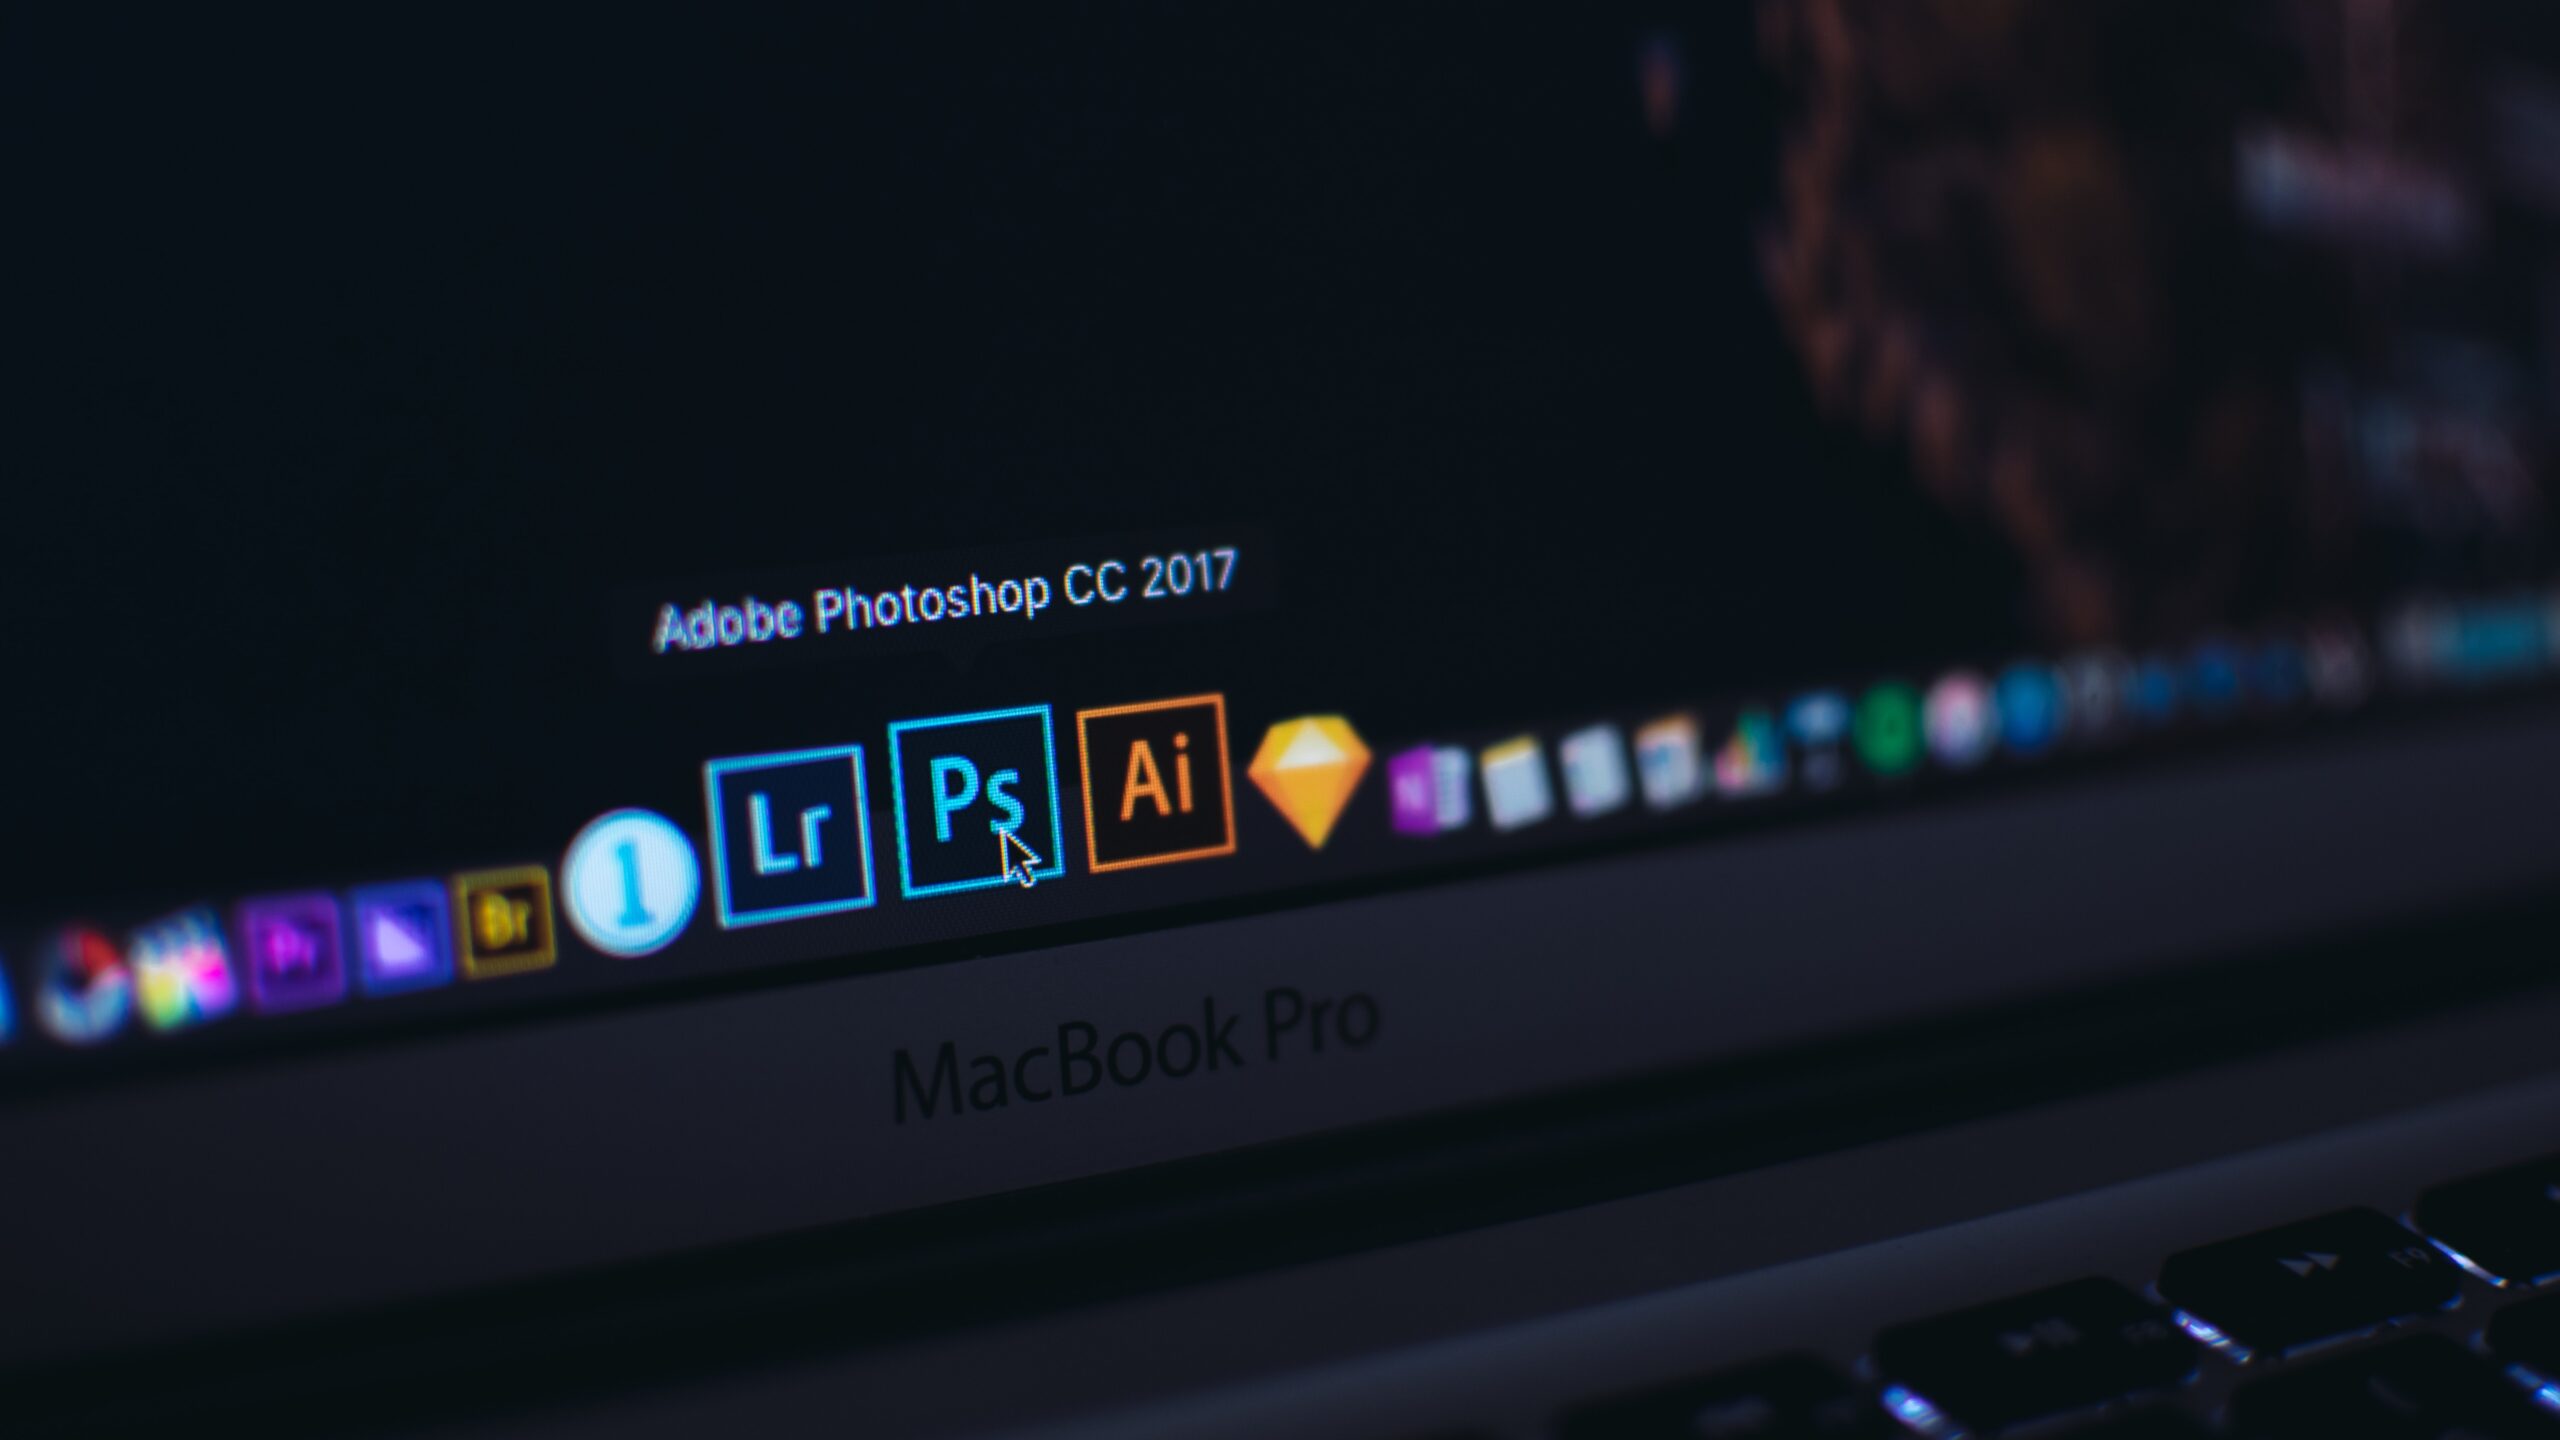 Featured image for “Adobe is integrating AI into Photoshop”